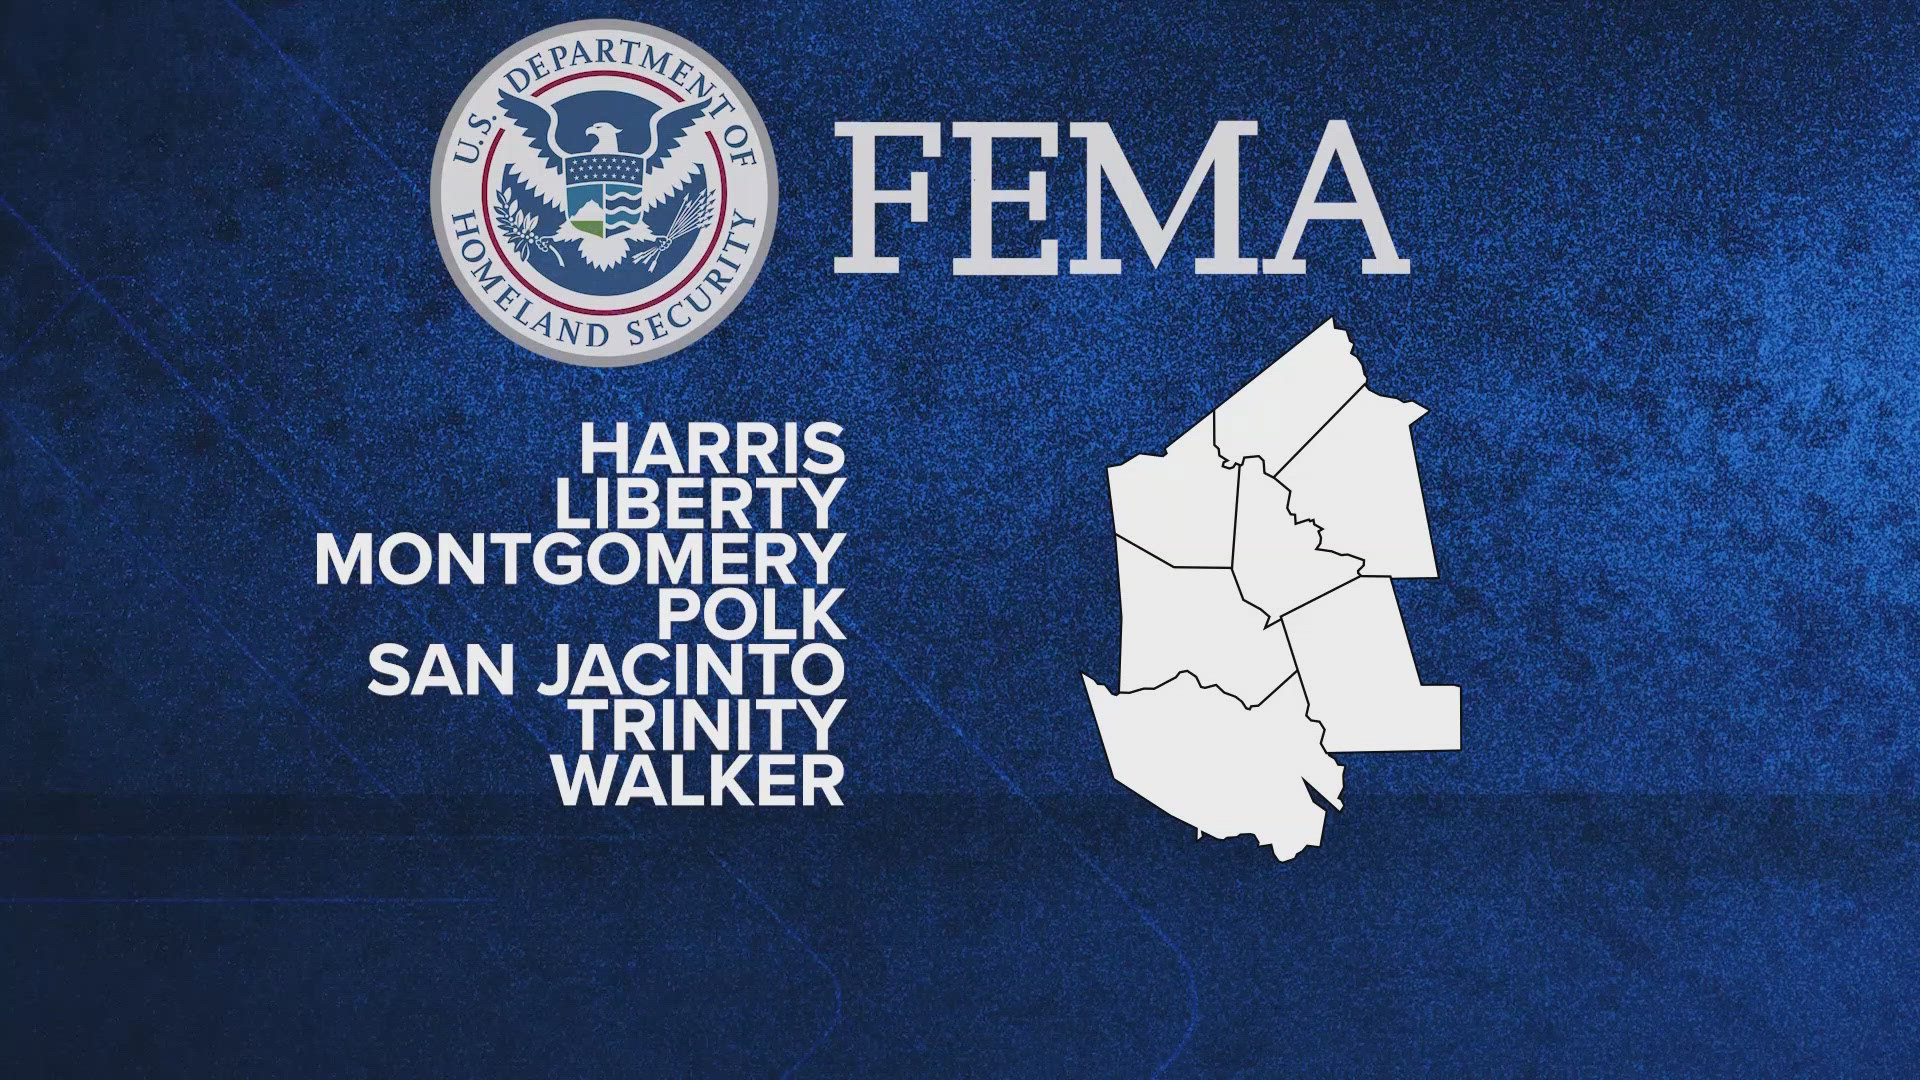 The application process has been streamlined so that people can apply to FEMA and U.S. Small Business Administration at the same time.